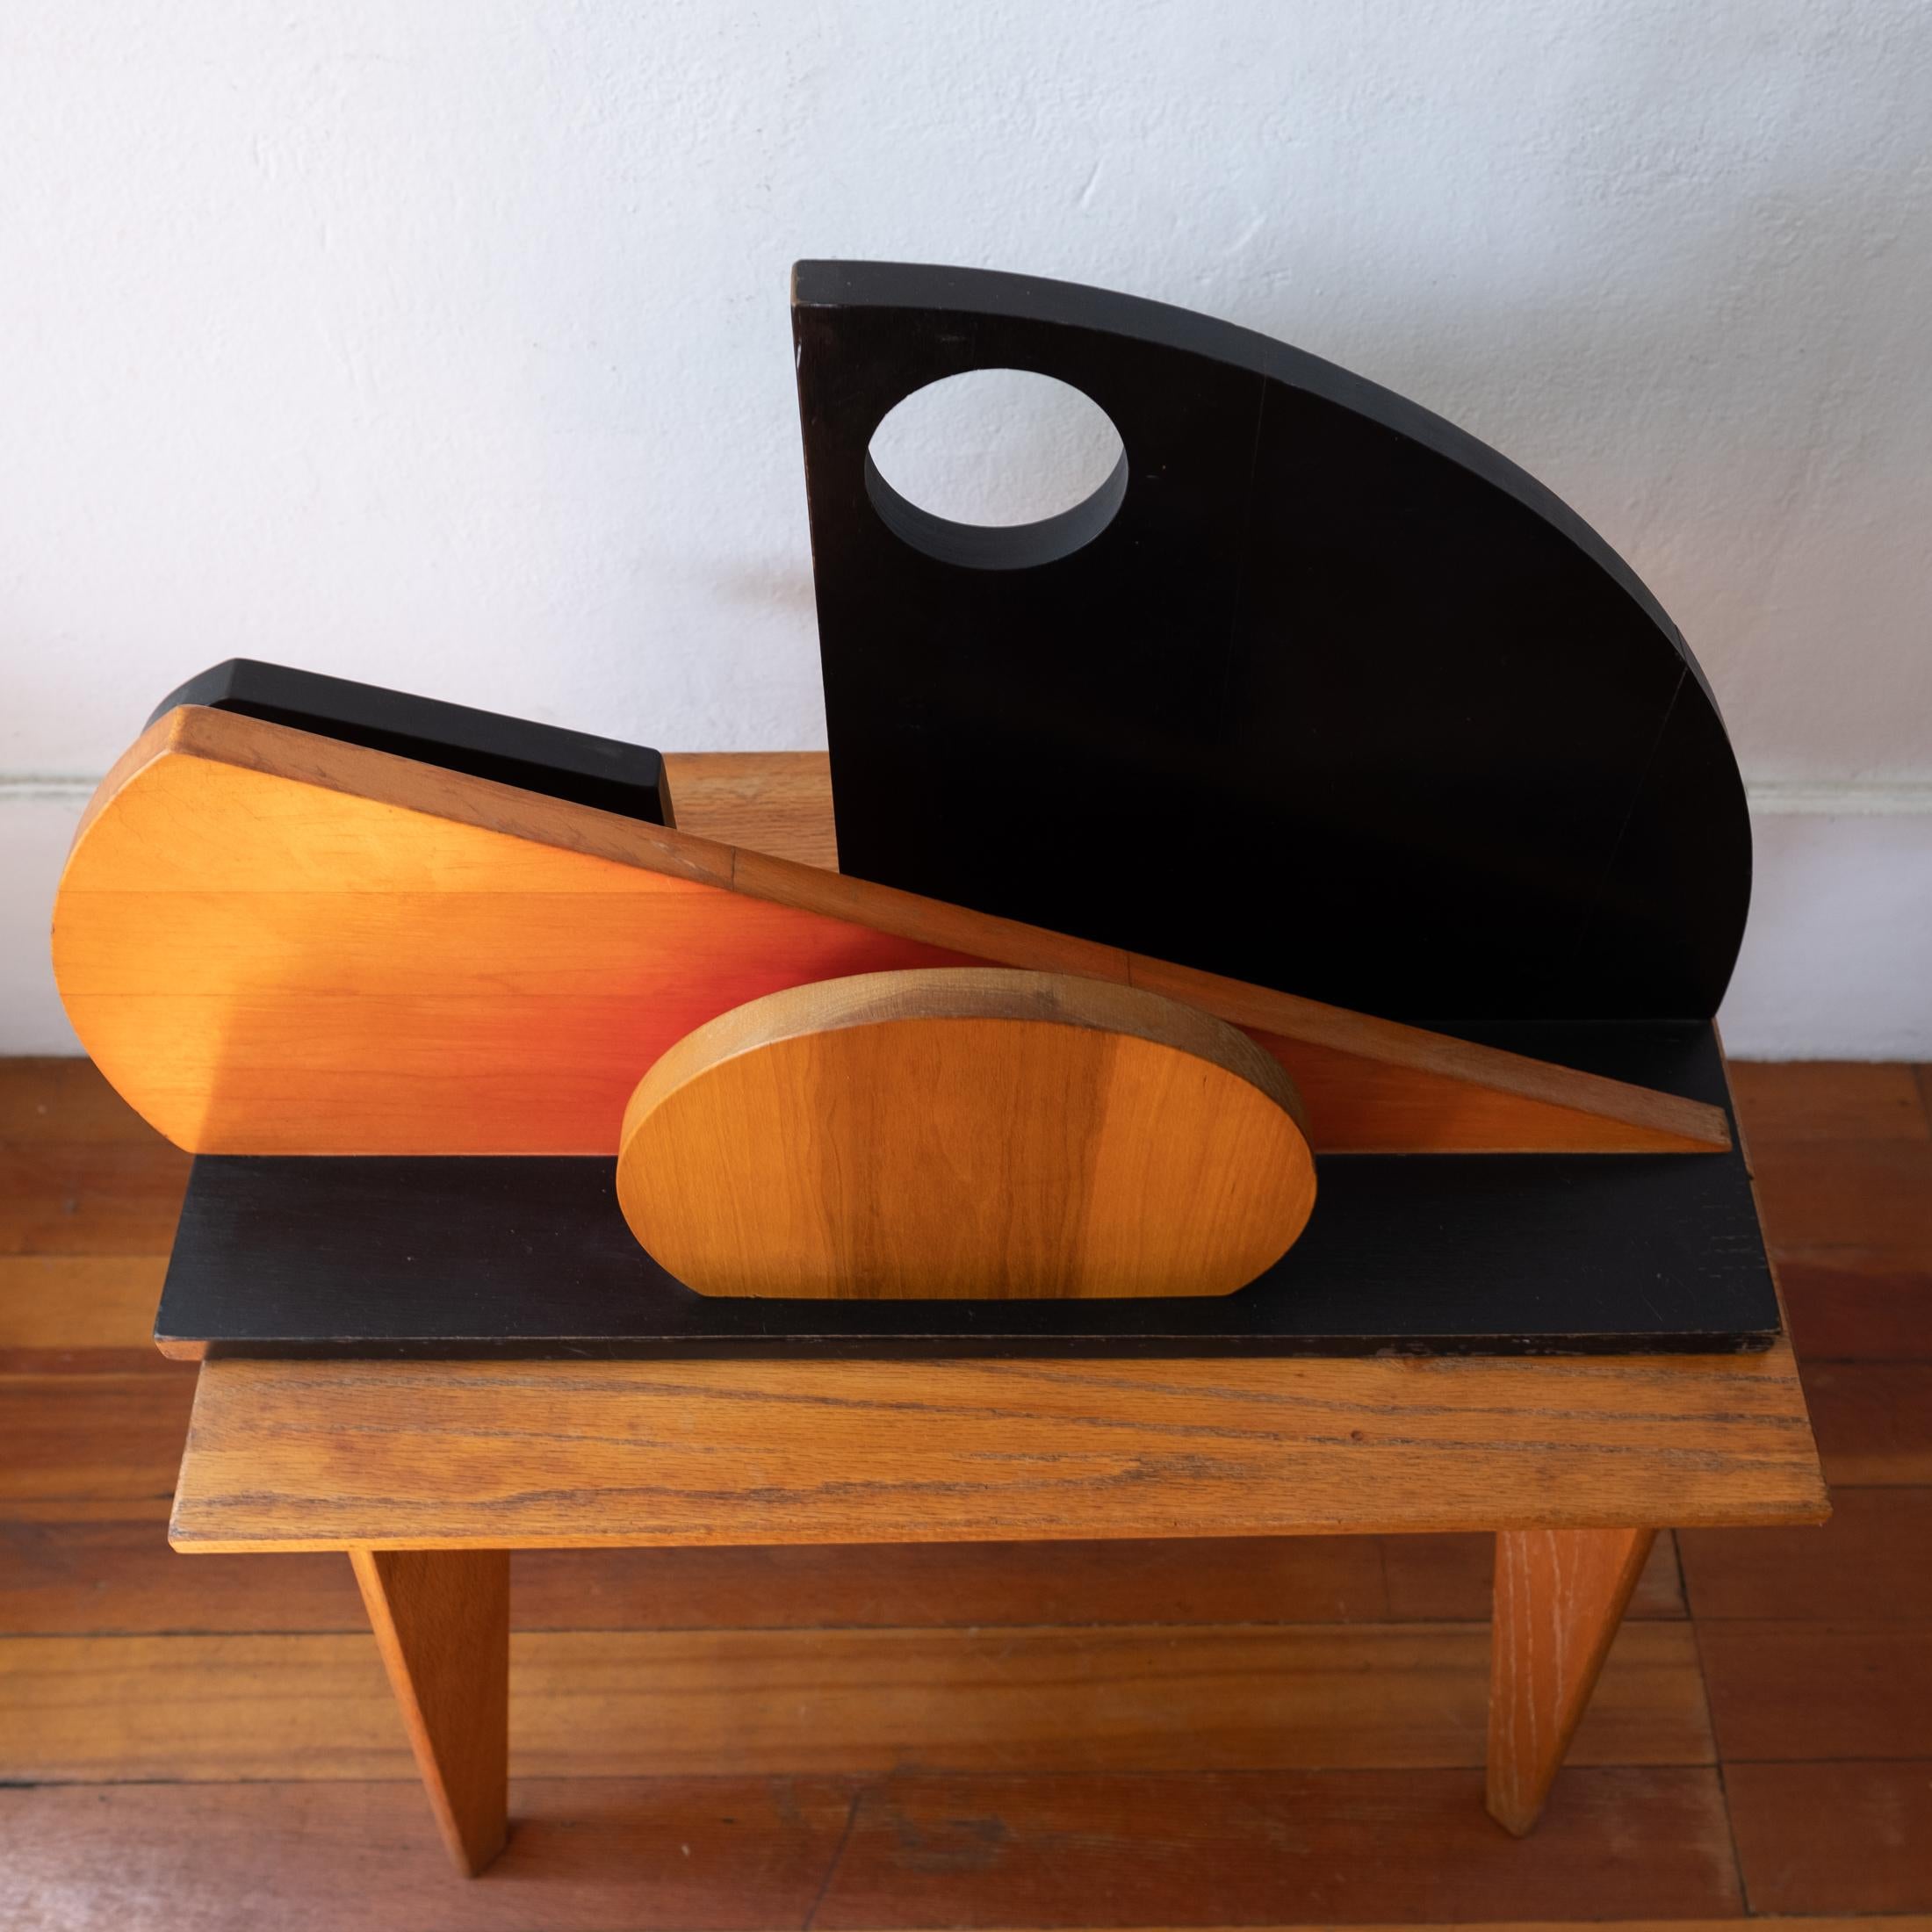 abstract wood sculptures